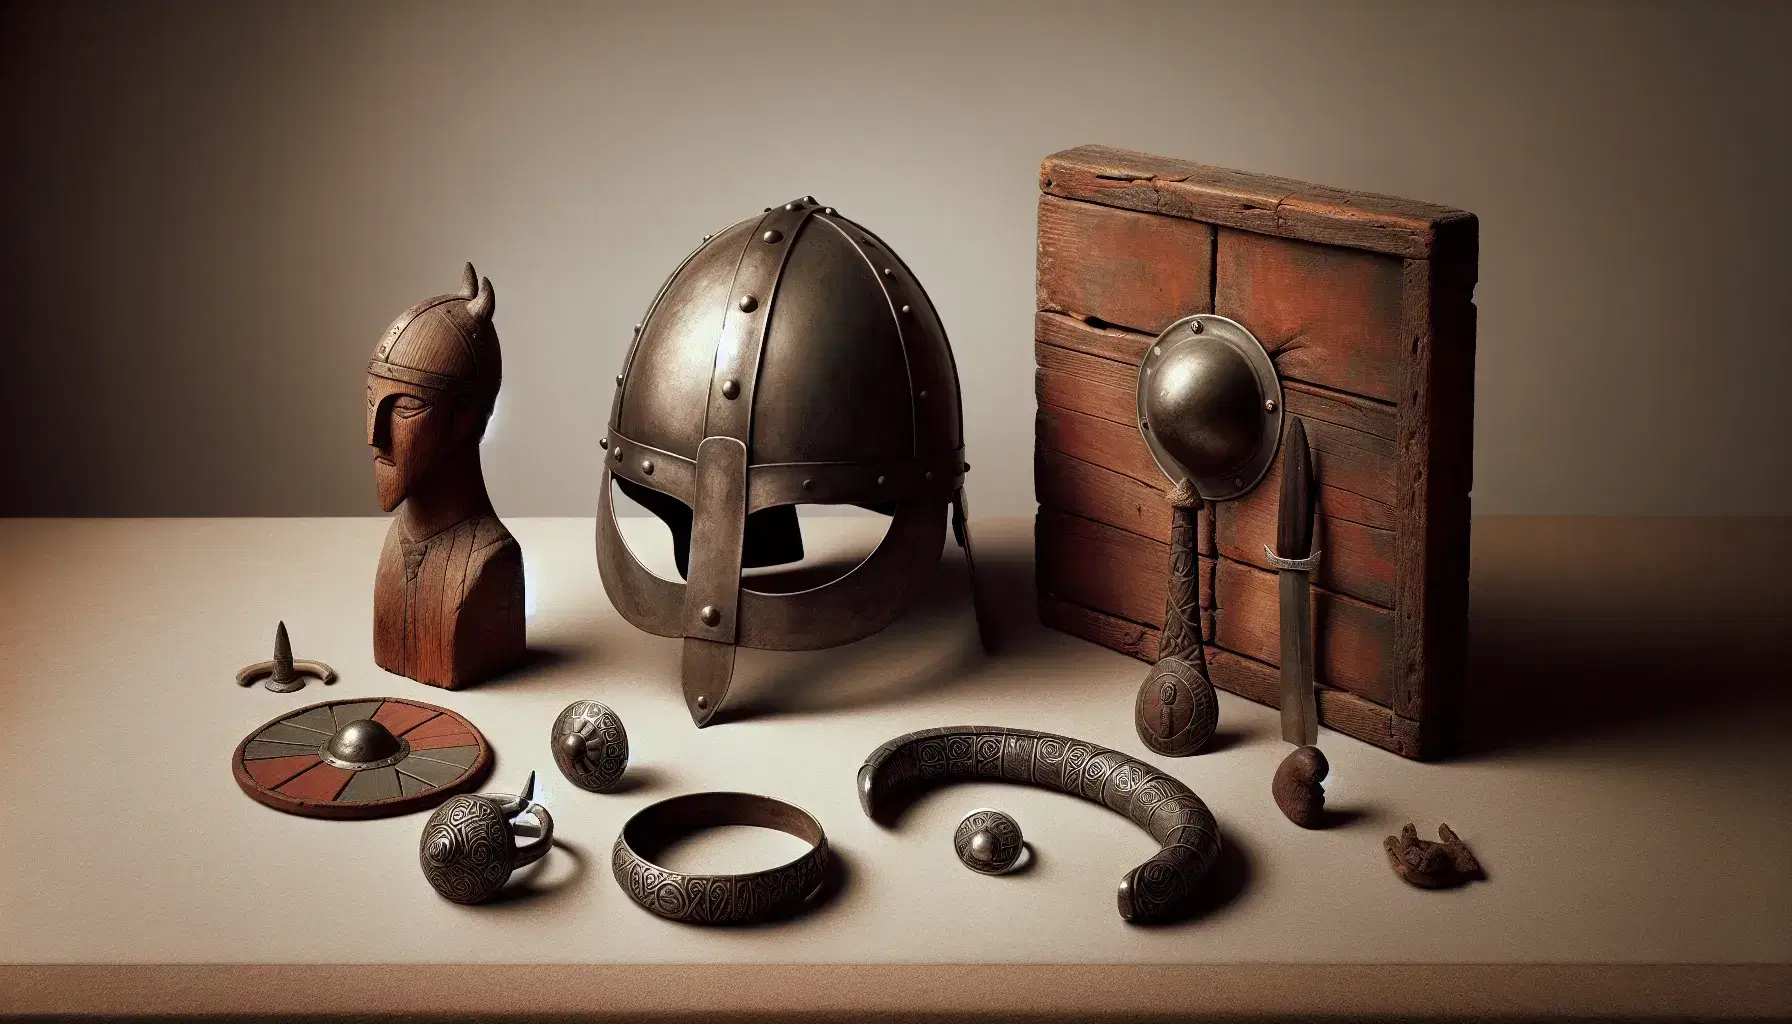 Viking helmet with nose guard, silver arm ring with etched patterns, carved wooden figurine, and a shield with a central metal boss, alongside a carved stone slab.